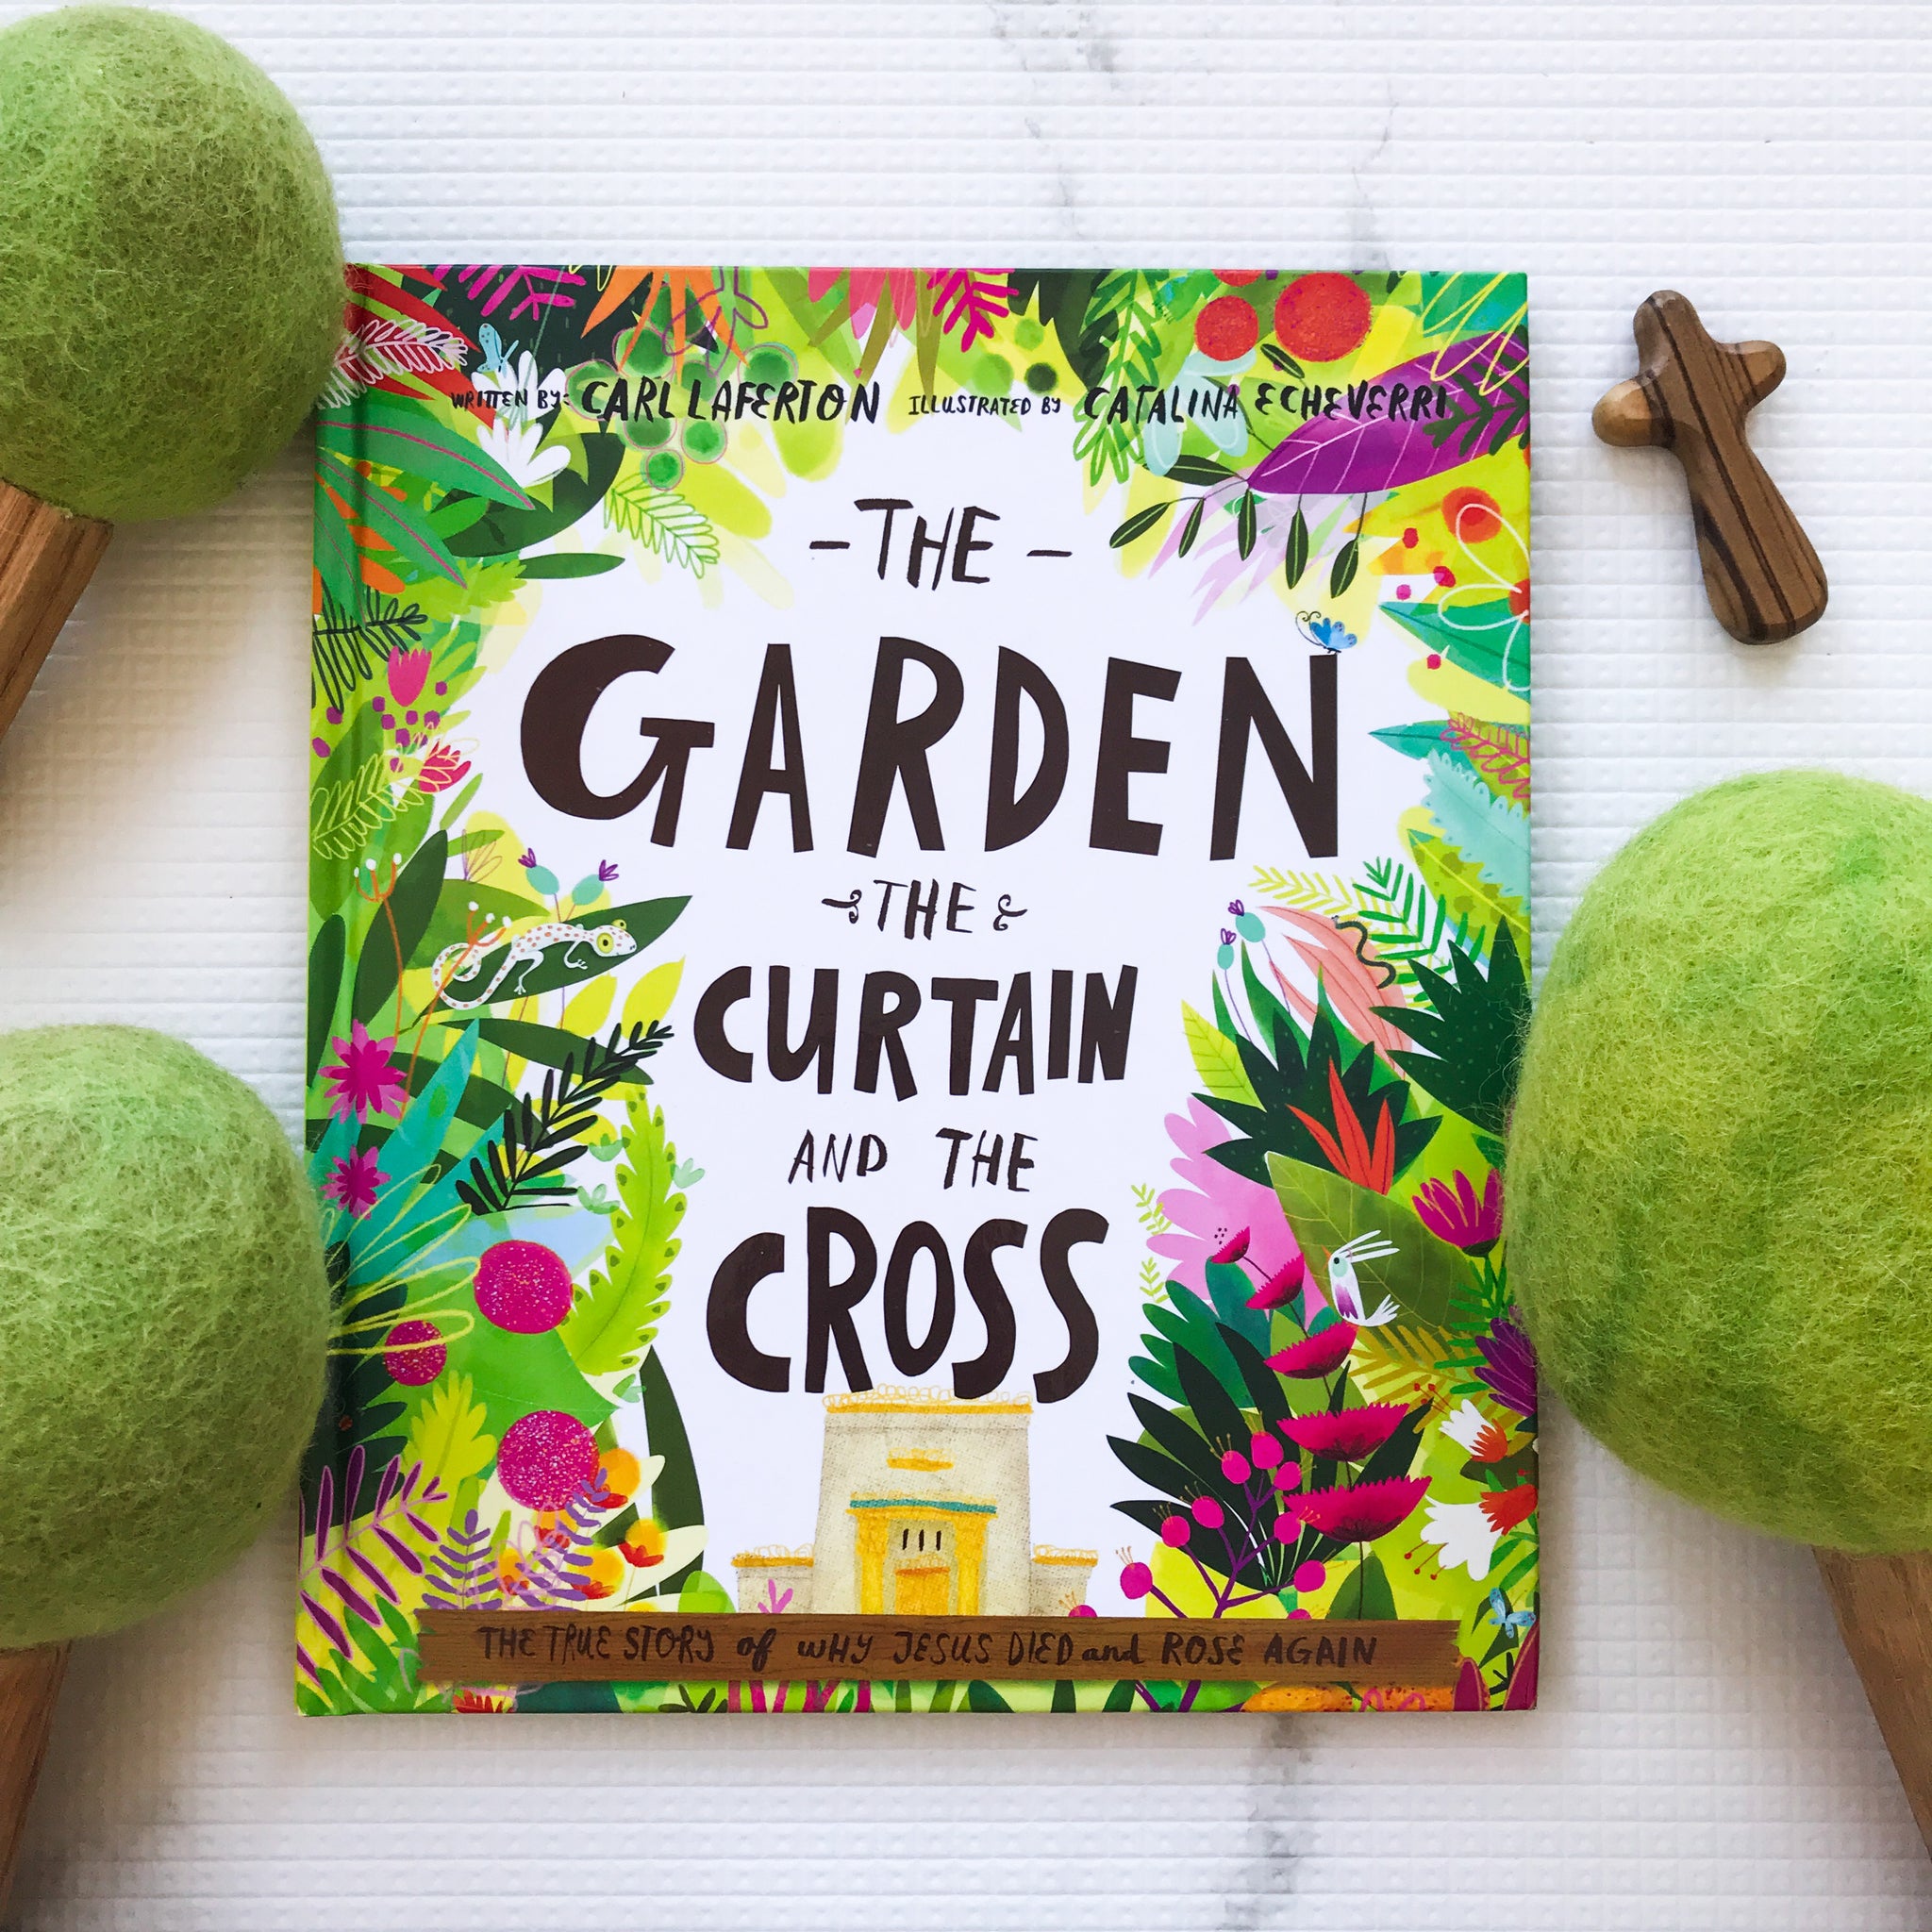 The Garden, The Curtain and The Cross: The True Story of Why Jesus Died and Rose Again